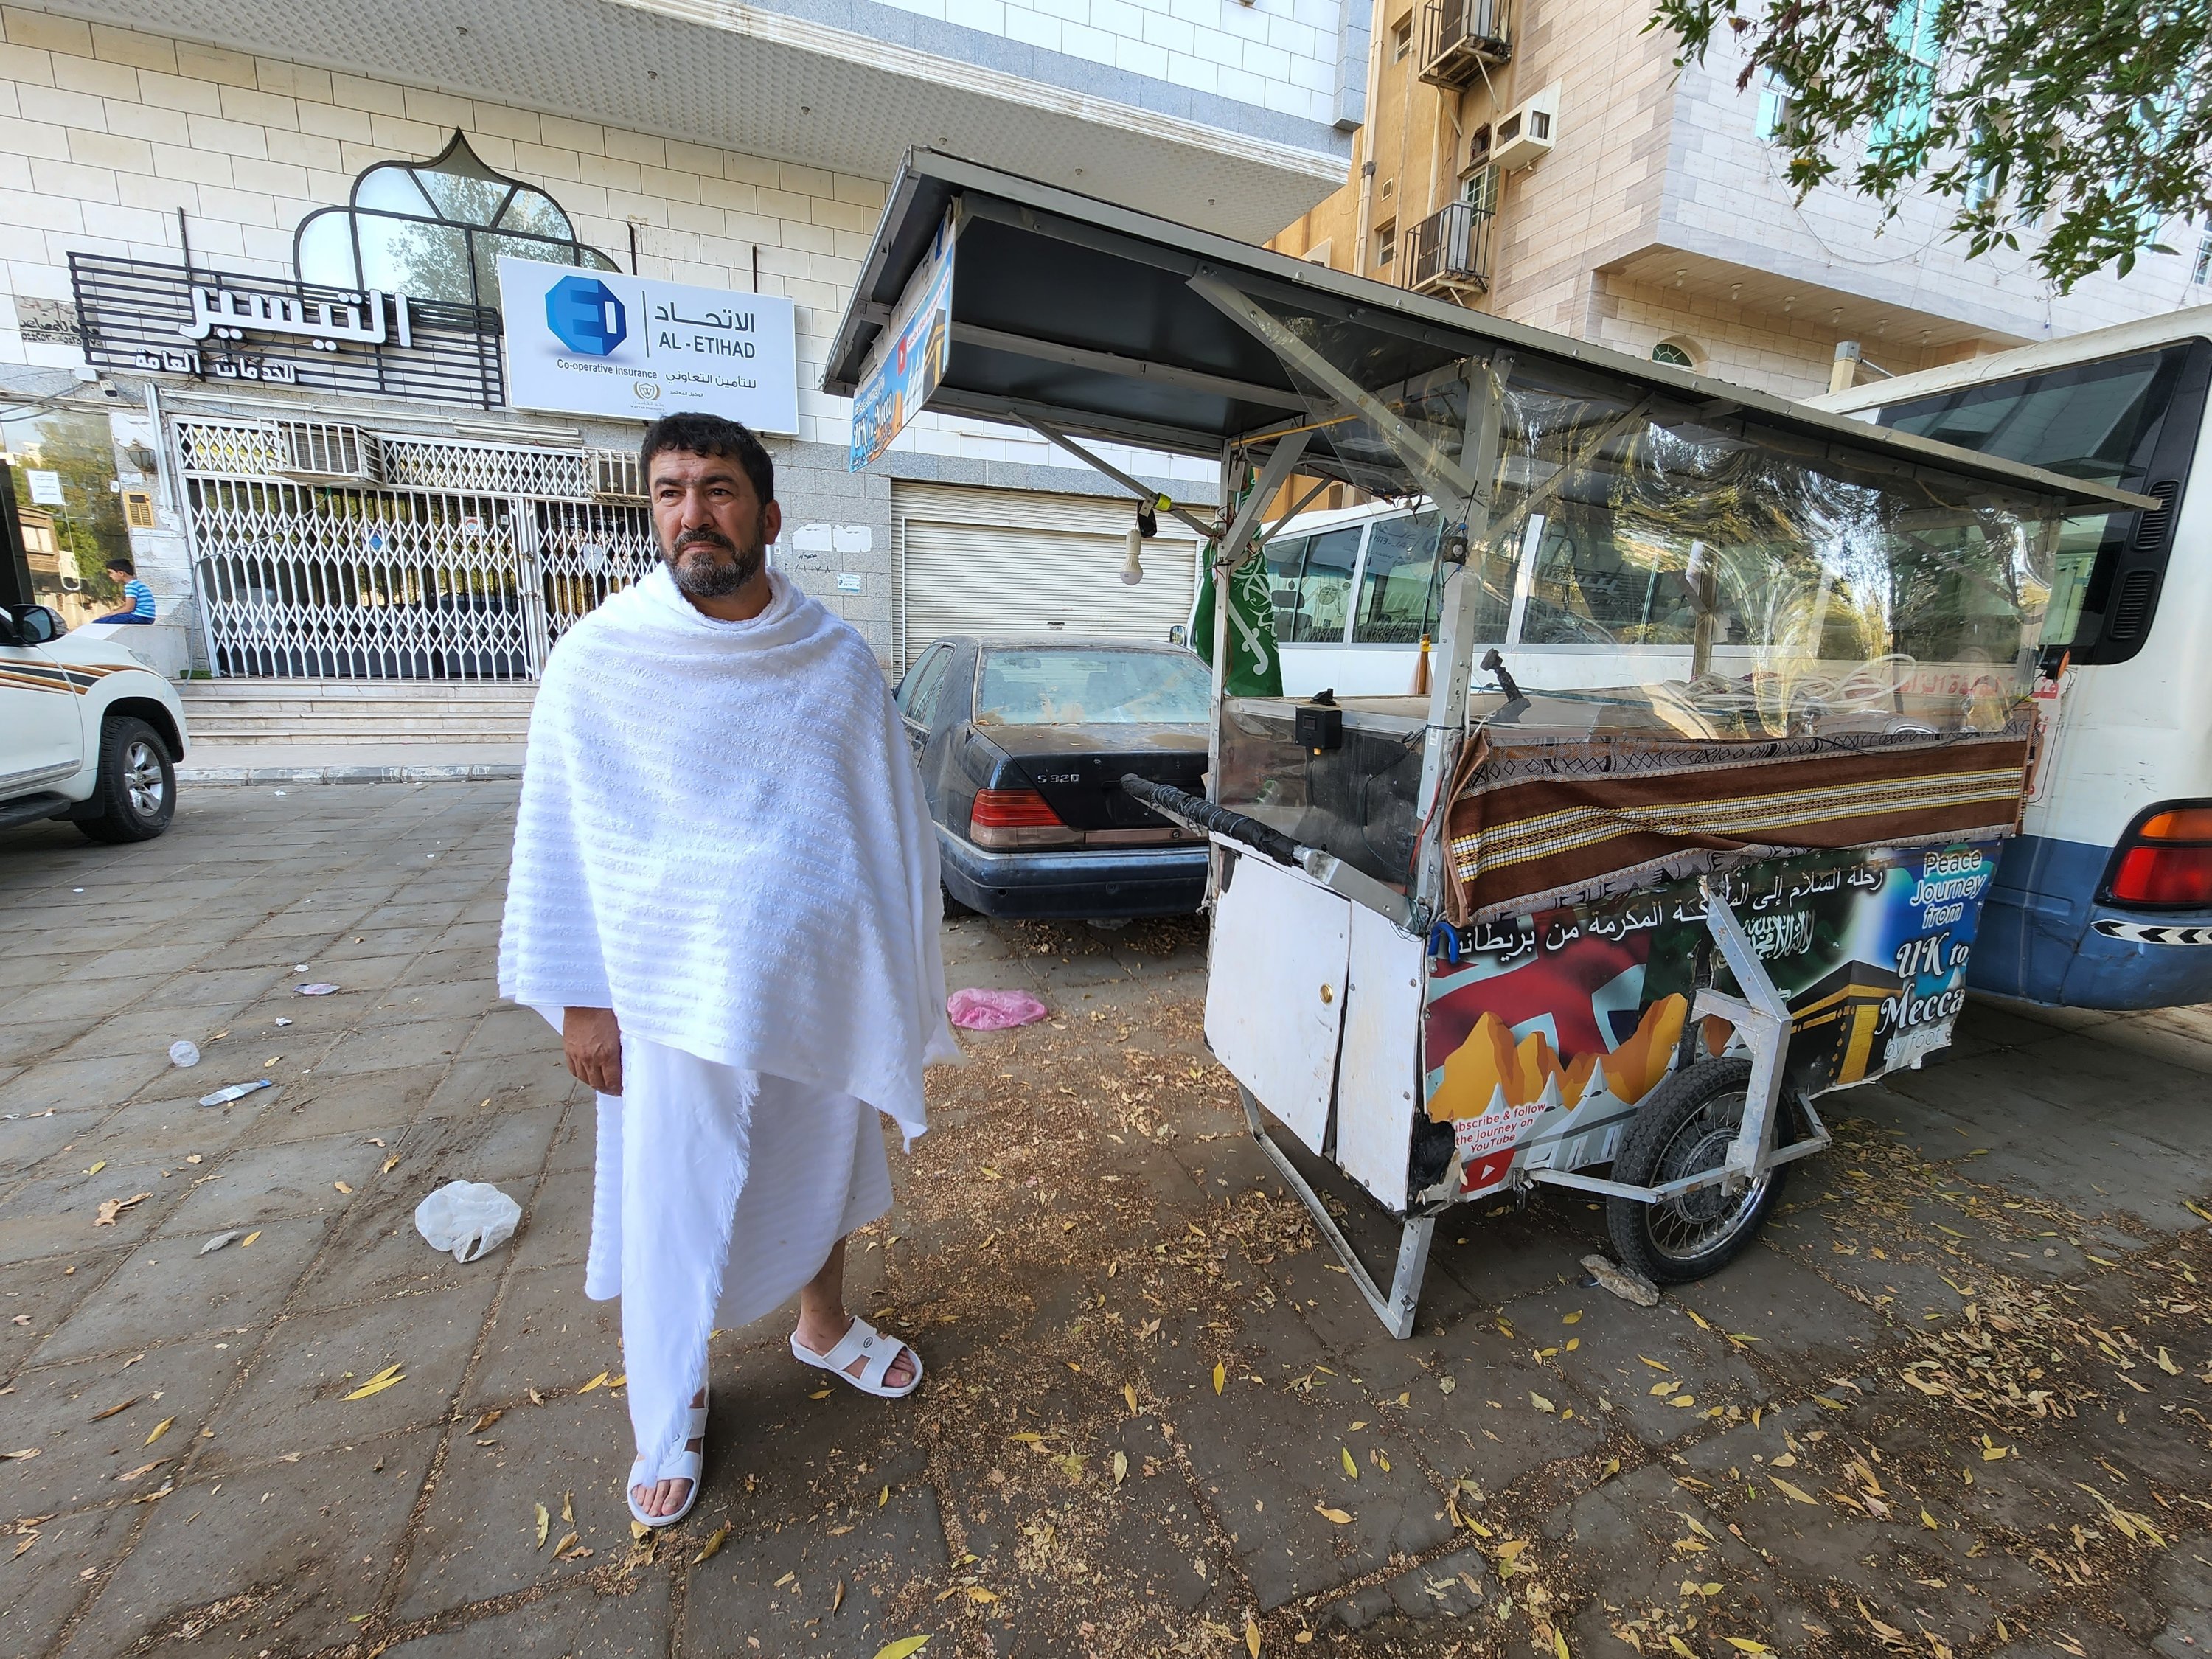 Adam Muhammed standing next to his cart that he pushed on the "Peace Journey" all the way from England to Saudi Arabia undertaking the whole journey on foot, Mecca, Saudi Arabia, July 5, 2022. (AA Photo)